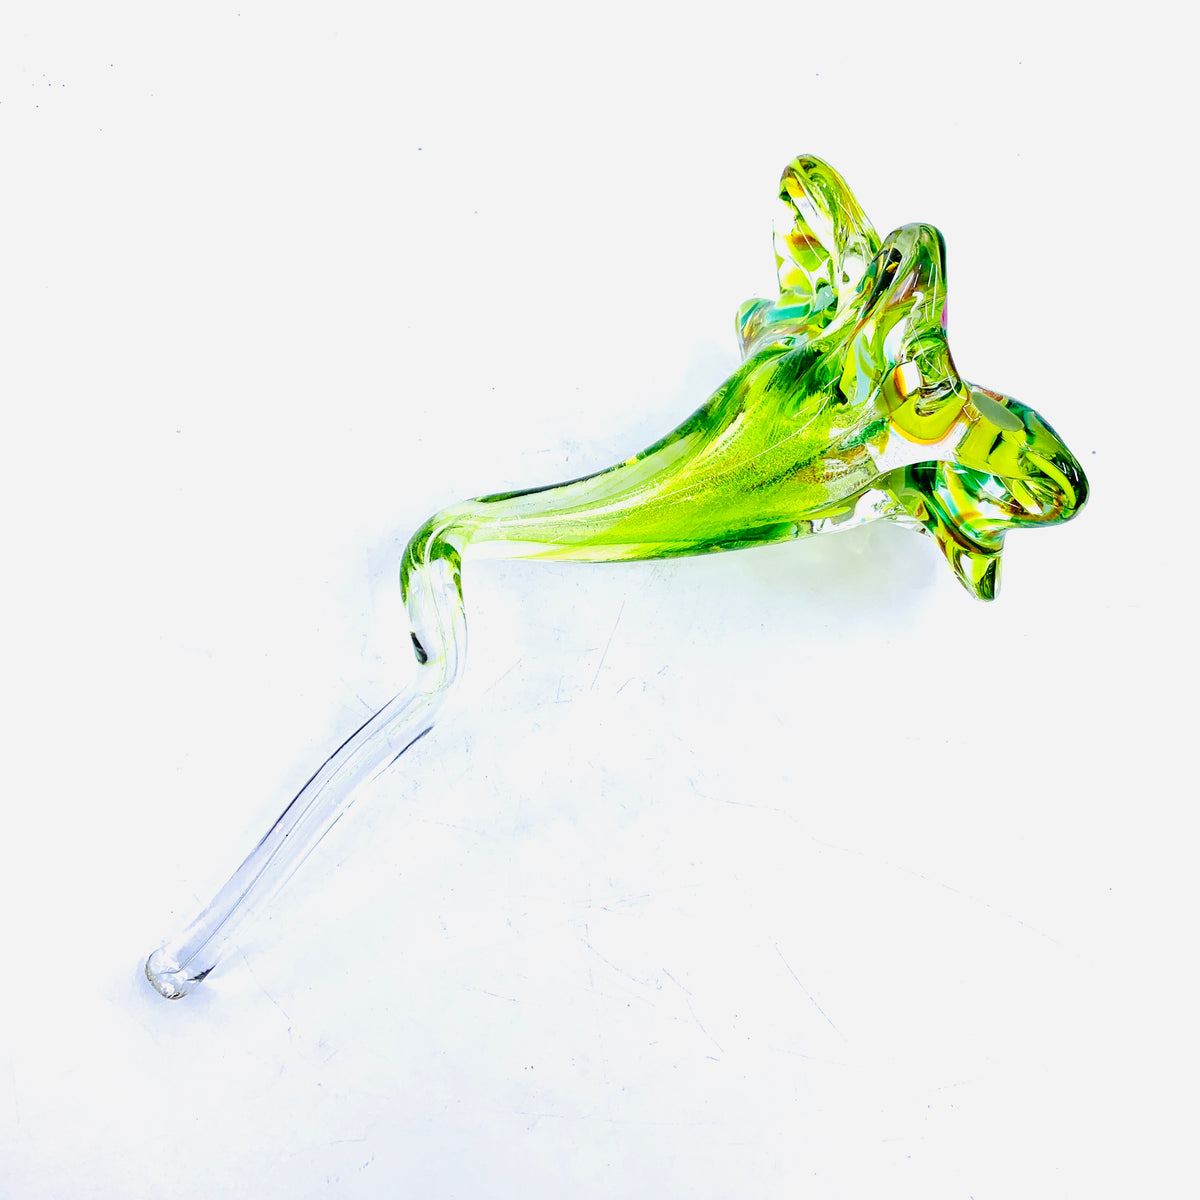 Pulled Glass Flower 467